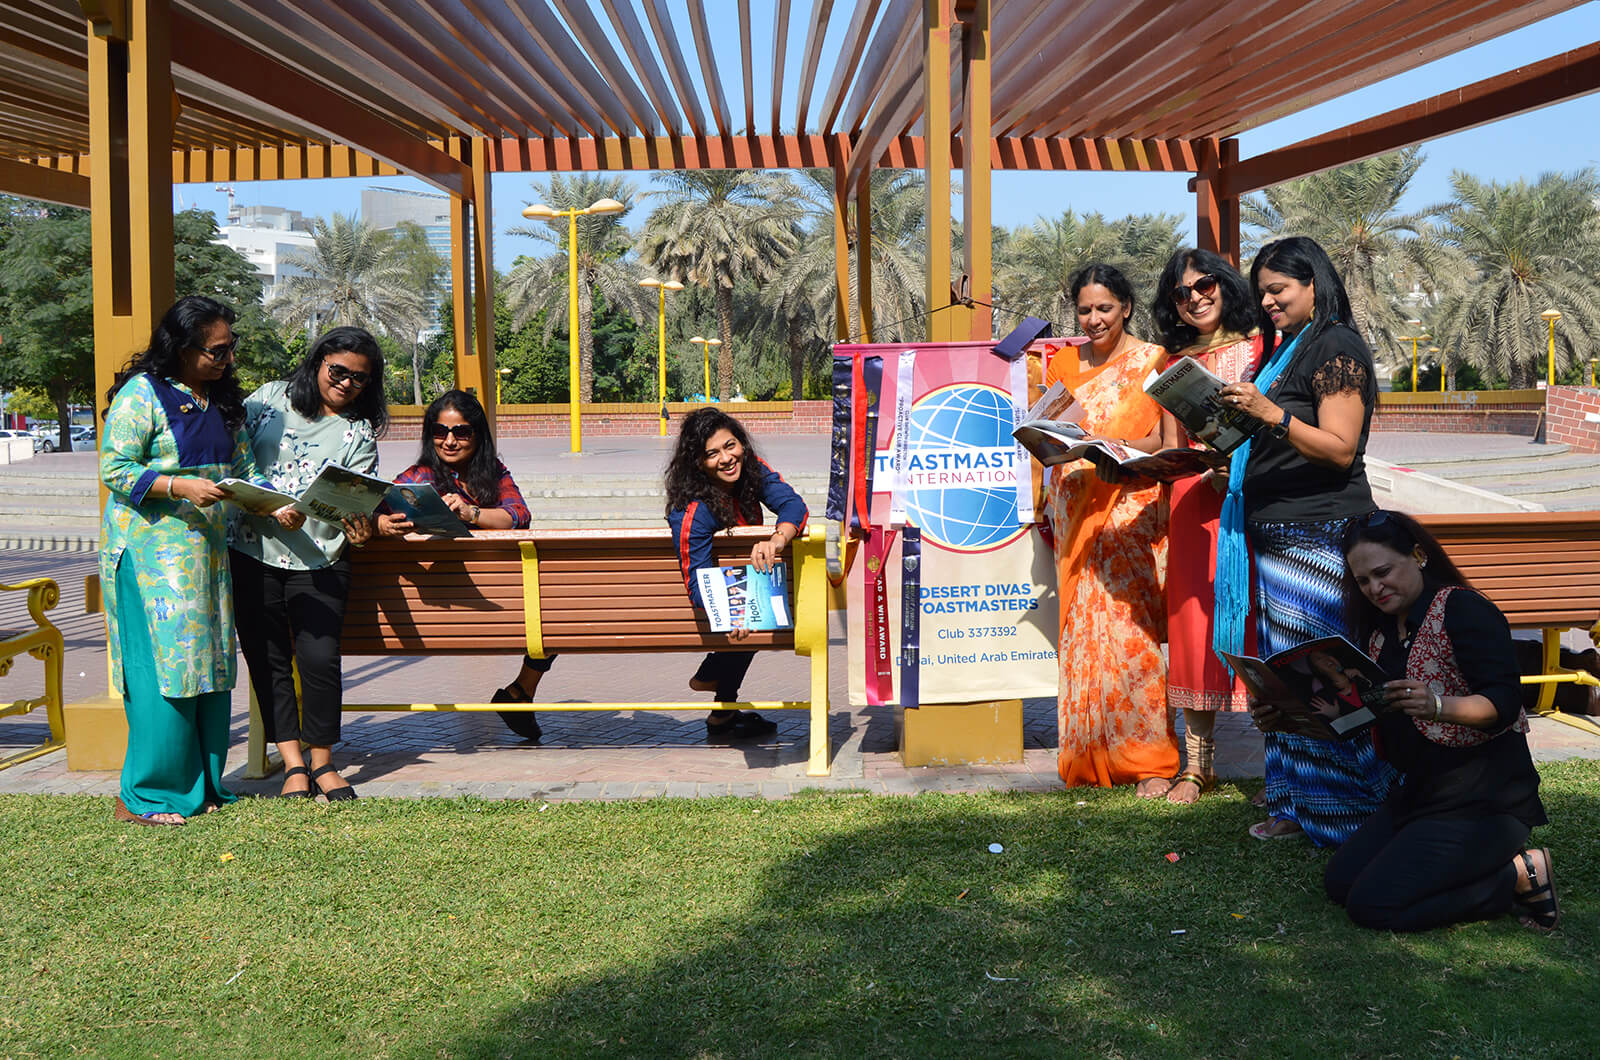 Members of the Desert Divas club of Dubai, United Arab Emirates, relax in the shade while hosting a meeting at a local park.